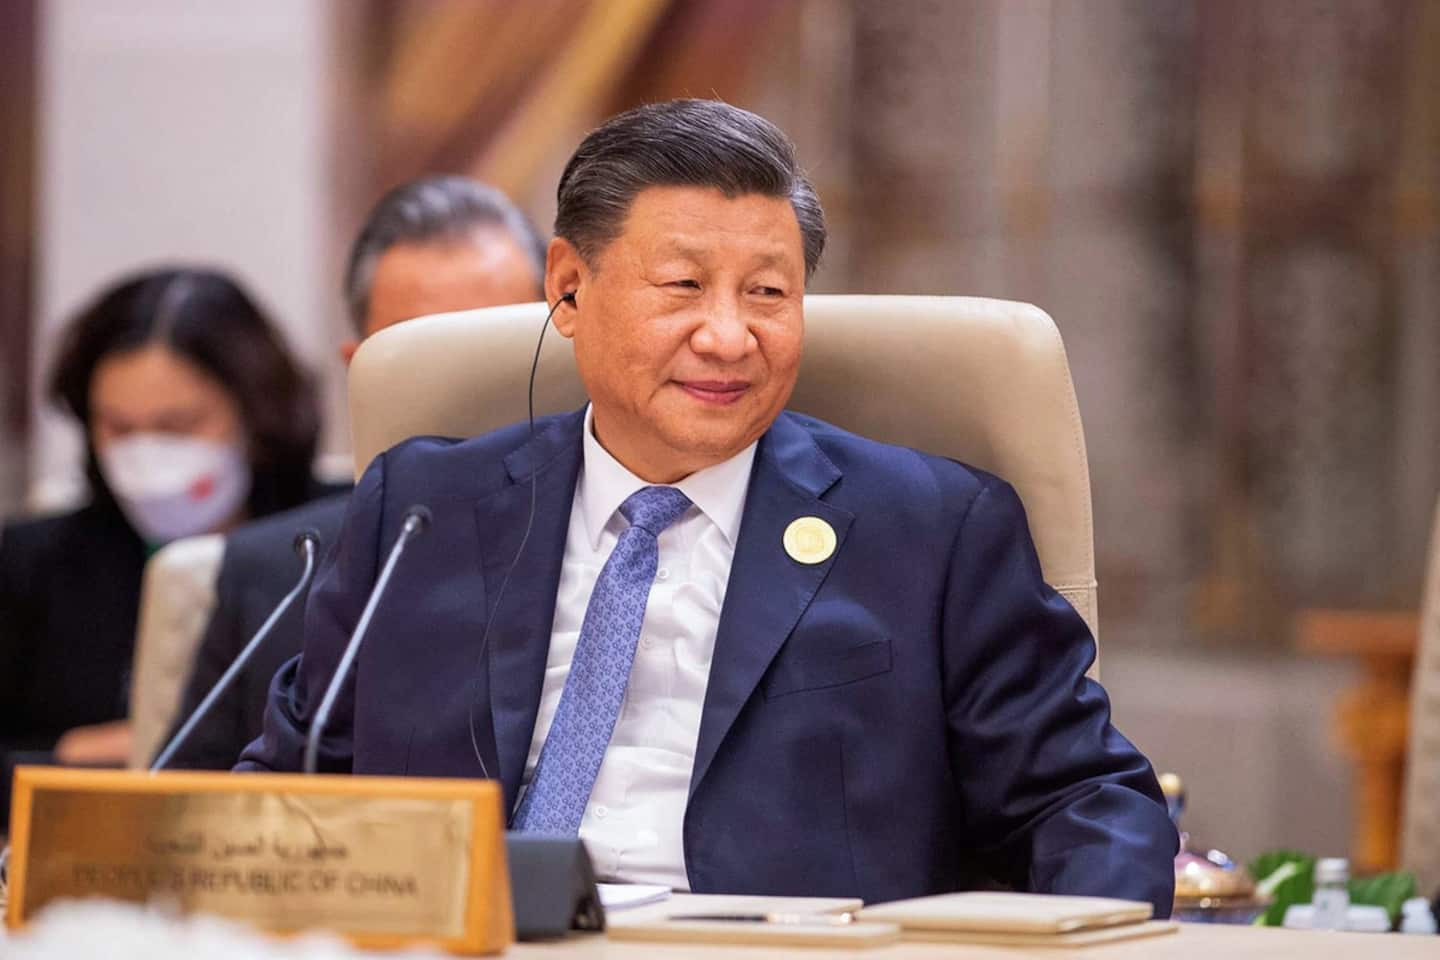 Despite COVID-19 in China, 'the light of hope is ahead of us', says Xi Jinping